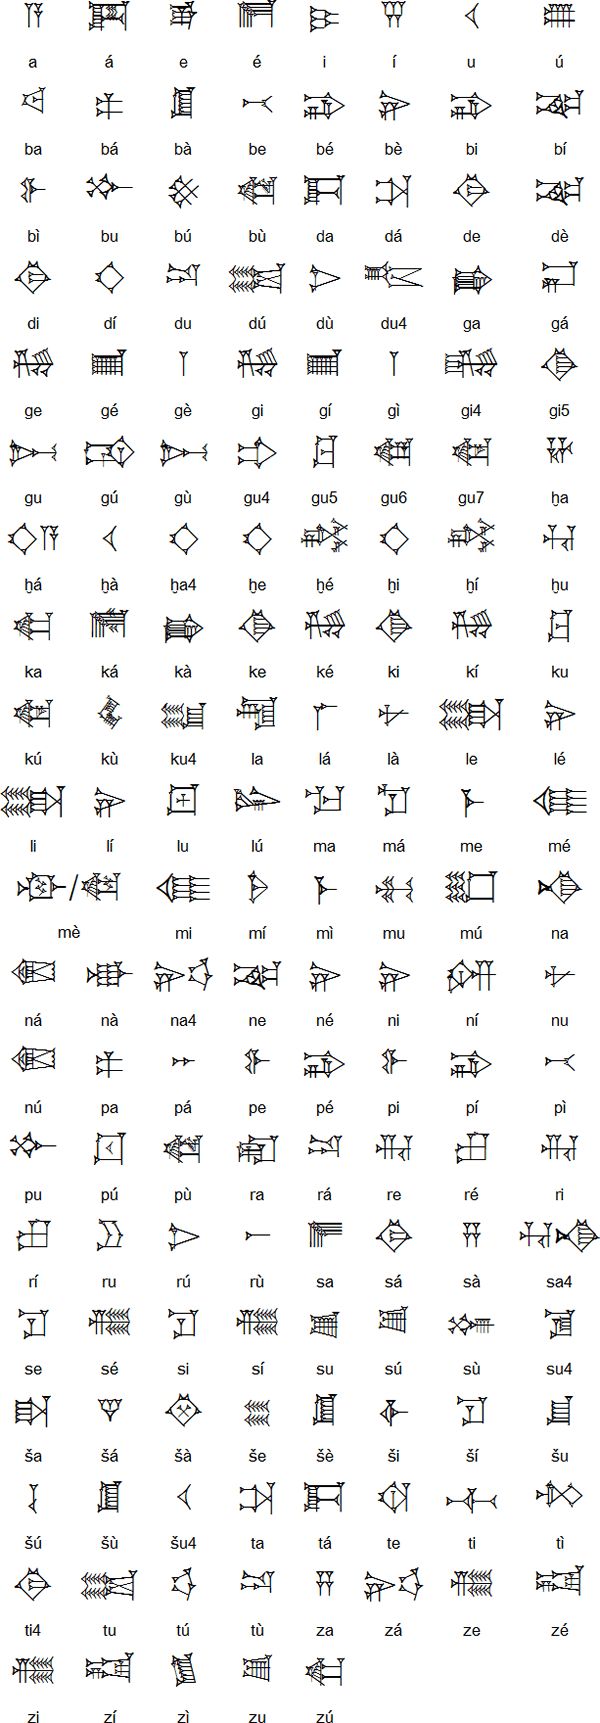 How to Write in Cuneiform, the Oldest Writing System in the World